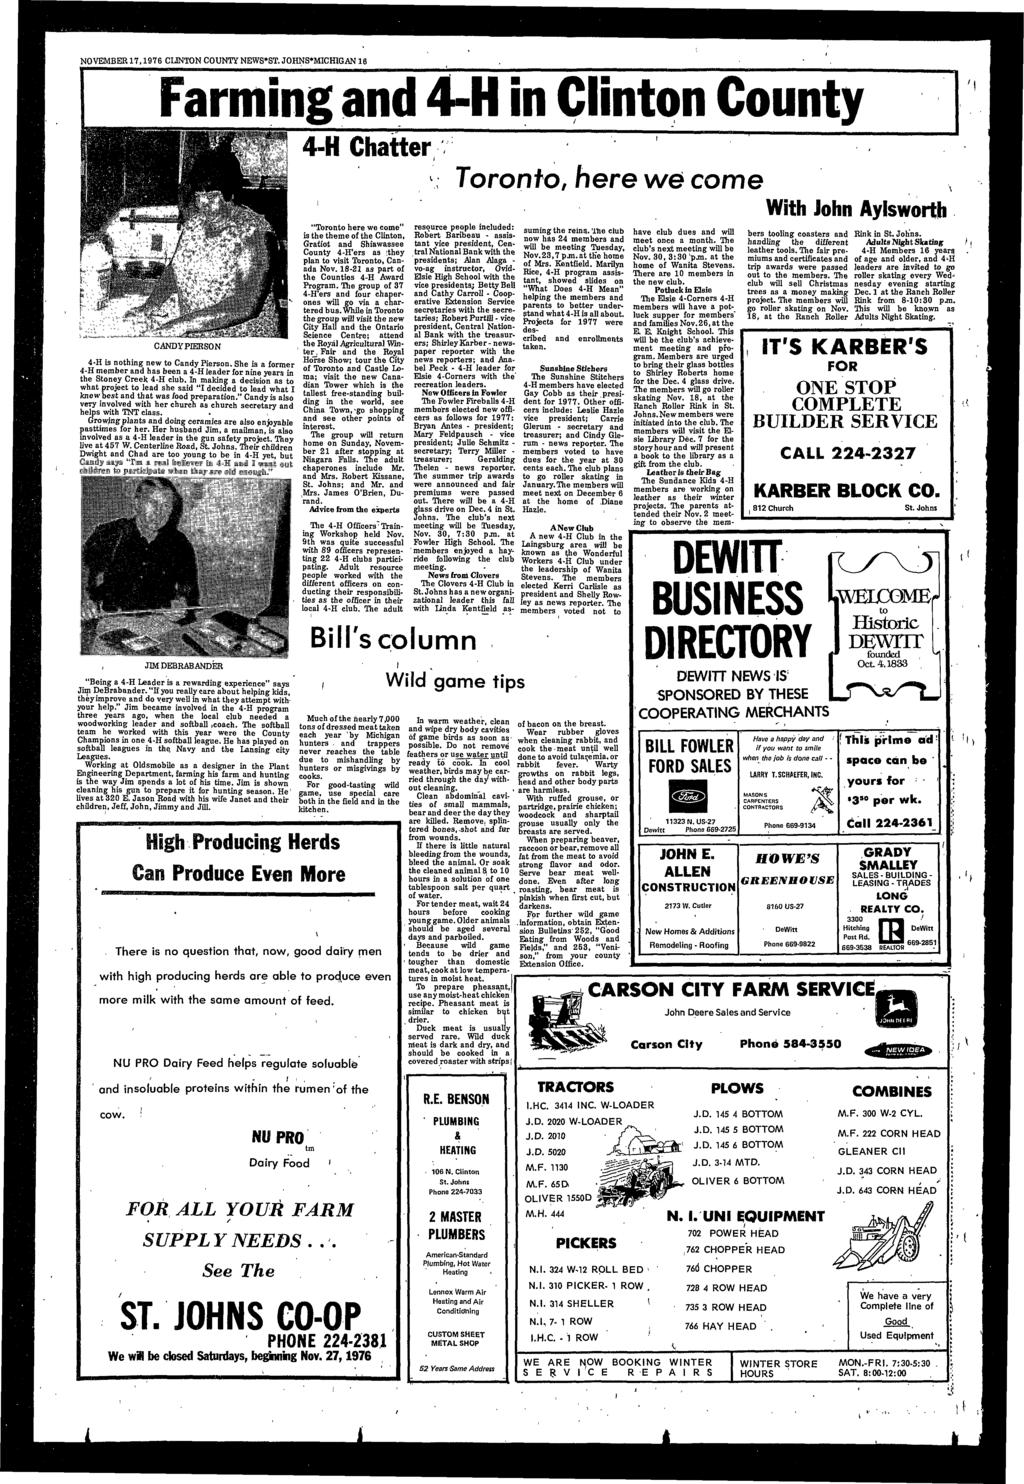 NOVEMBER17.1976 CLJNTON COUNTY NEWS*ST.JOHNS*MICHIGAN 16 Farmng and 4-H n Clnton County 4-H Chatter Toronto, here we come CANDY PIERSON 4-H s nothng new to Candy Person.